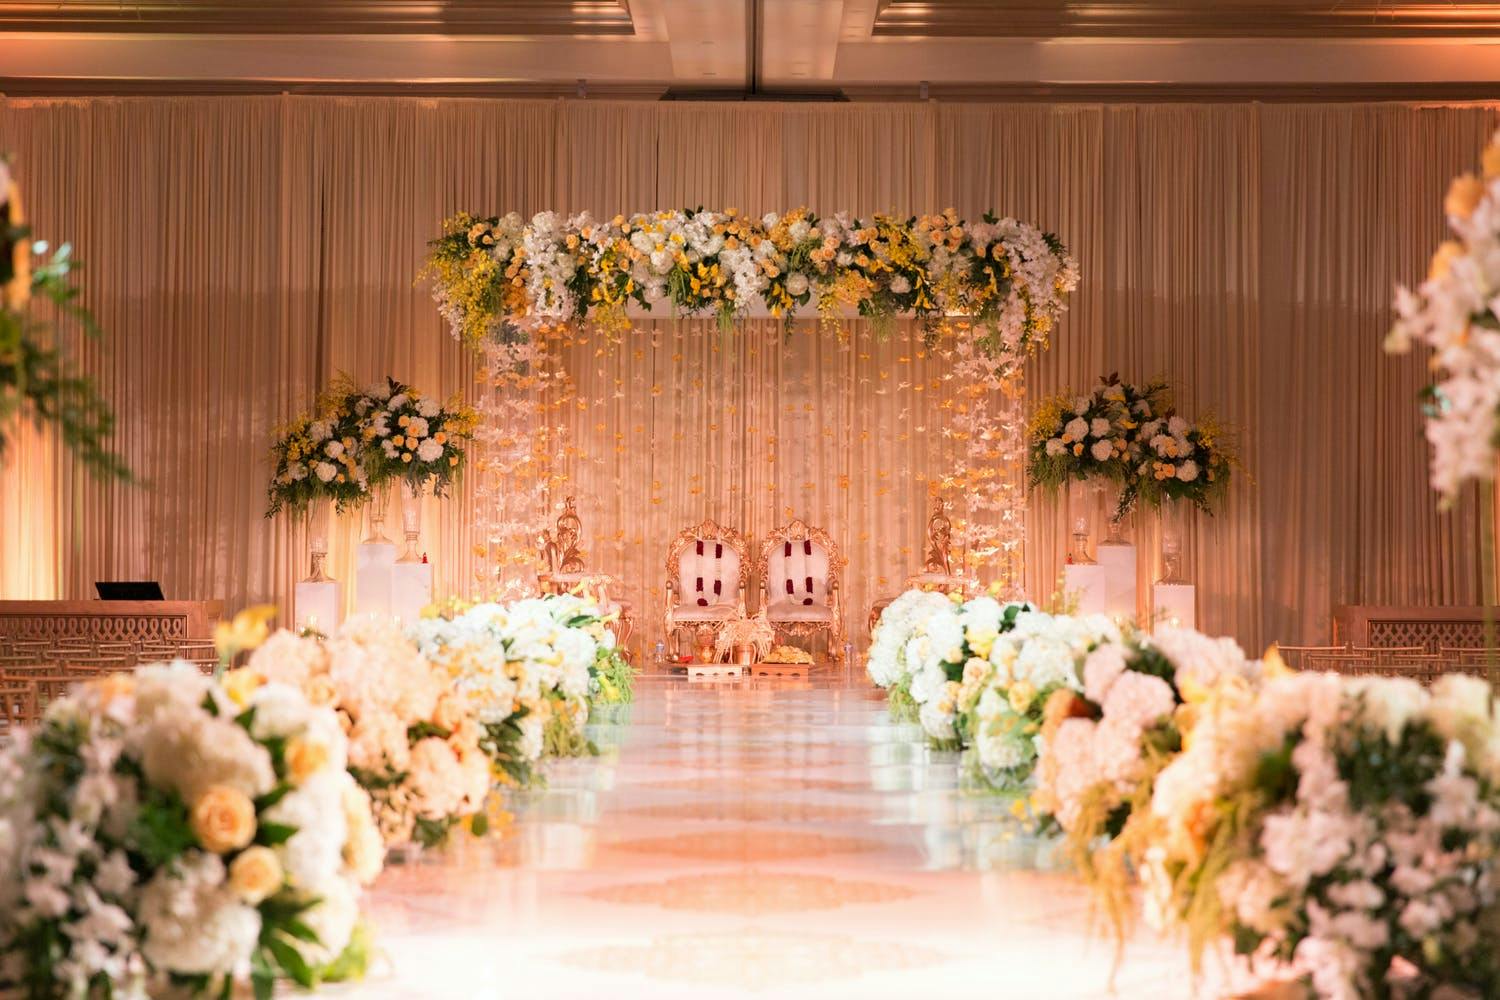 Mandap With Summery Golden Florals and Suspended Flower Tassels | PartySlate